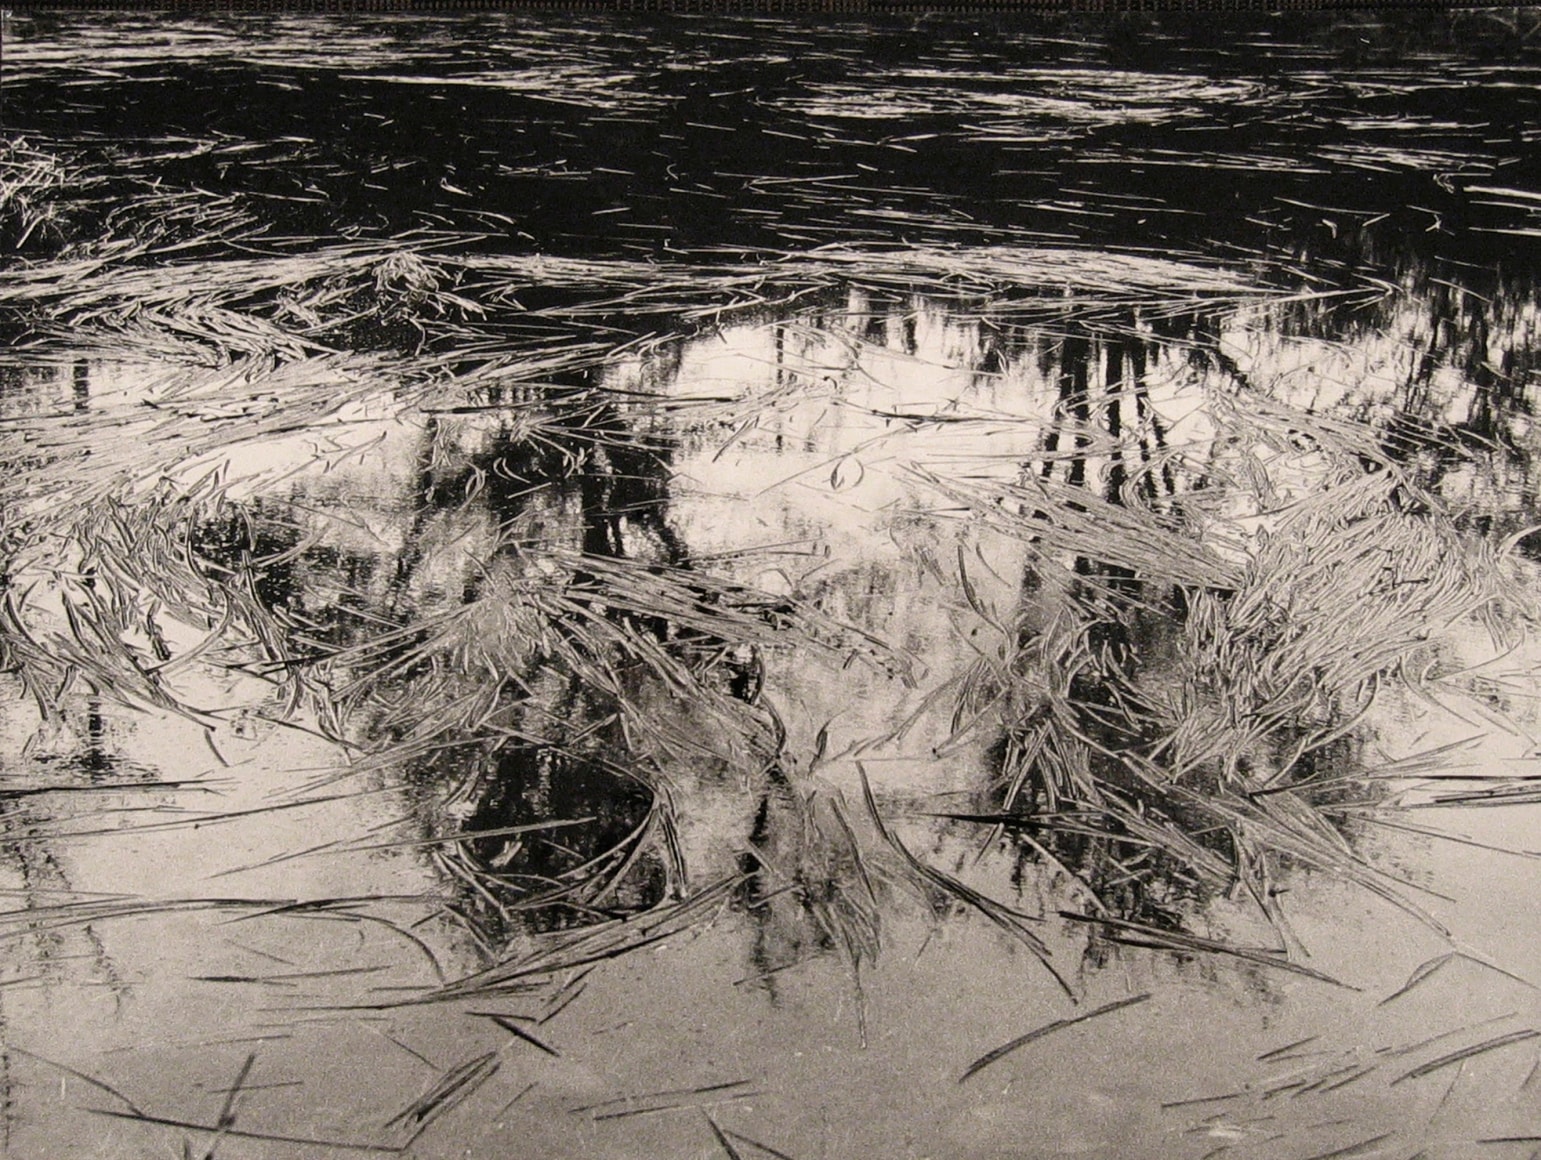 Tullio Stravisi, Il Temporale, ​1953. Reeds floating on a still body of water reflecting trees.